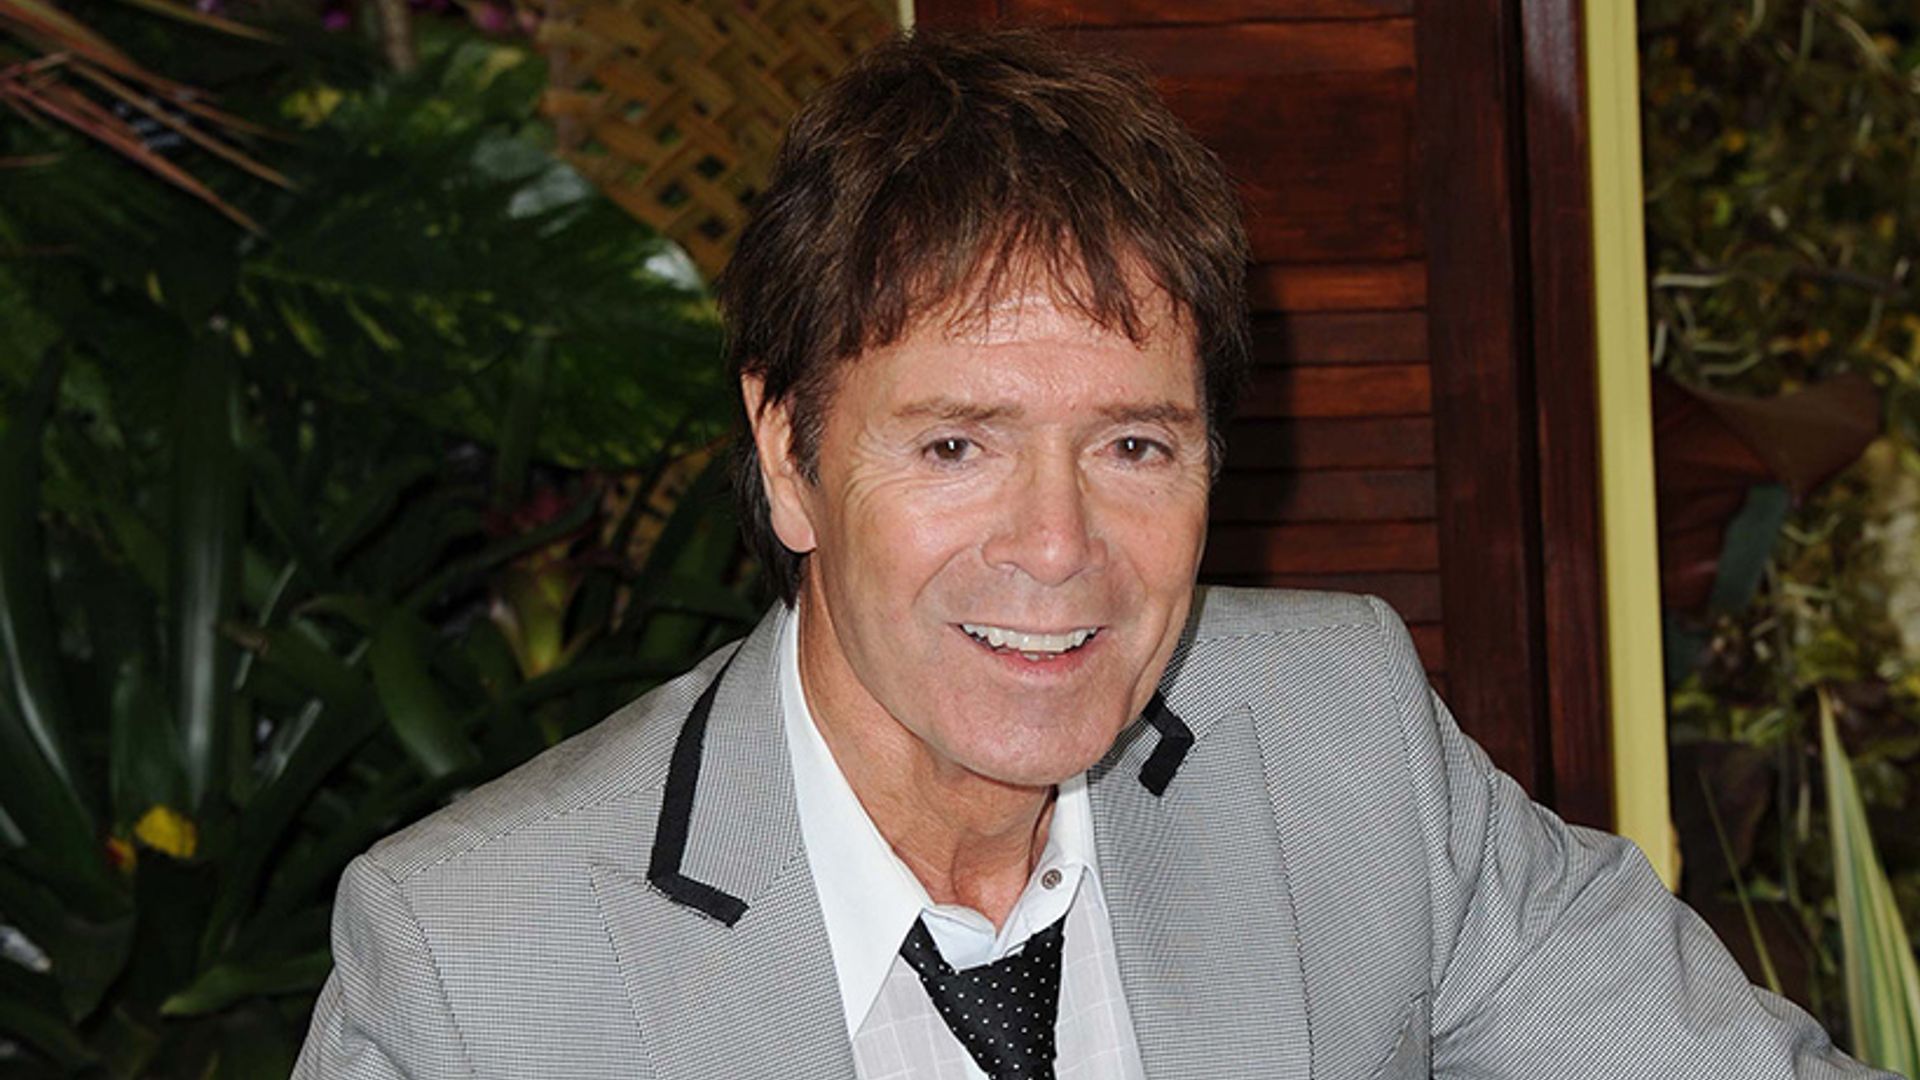 Sir Cliff Richard speaks out in candid new interview